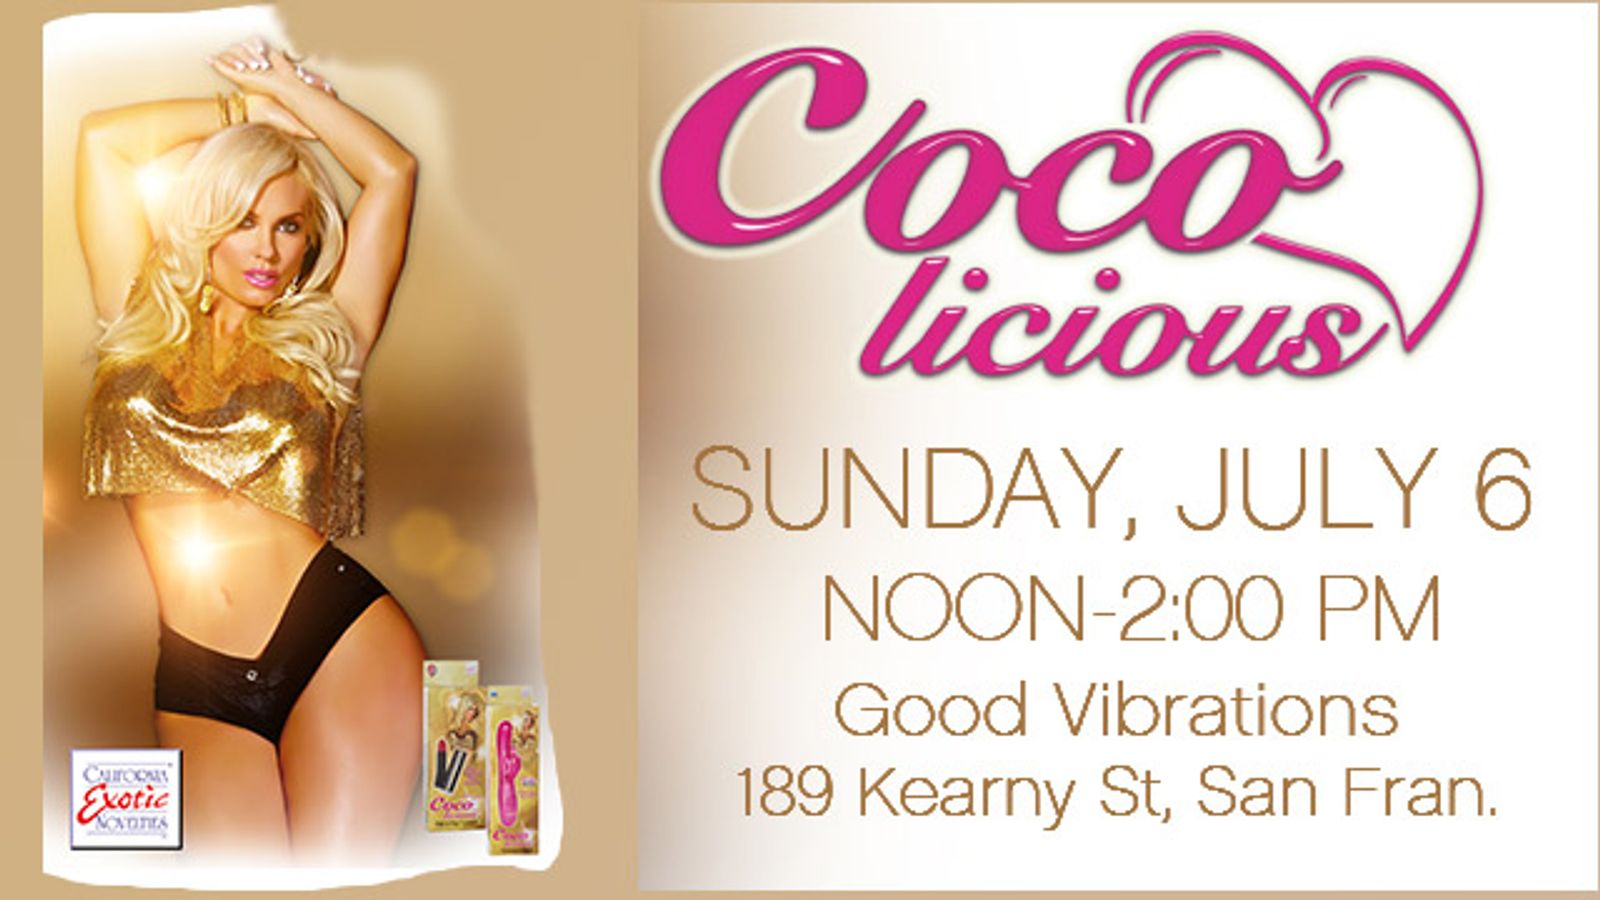 Catch Reality Star Coco at Good Vibrations July 4 Weekend